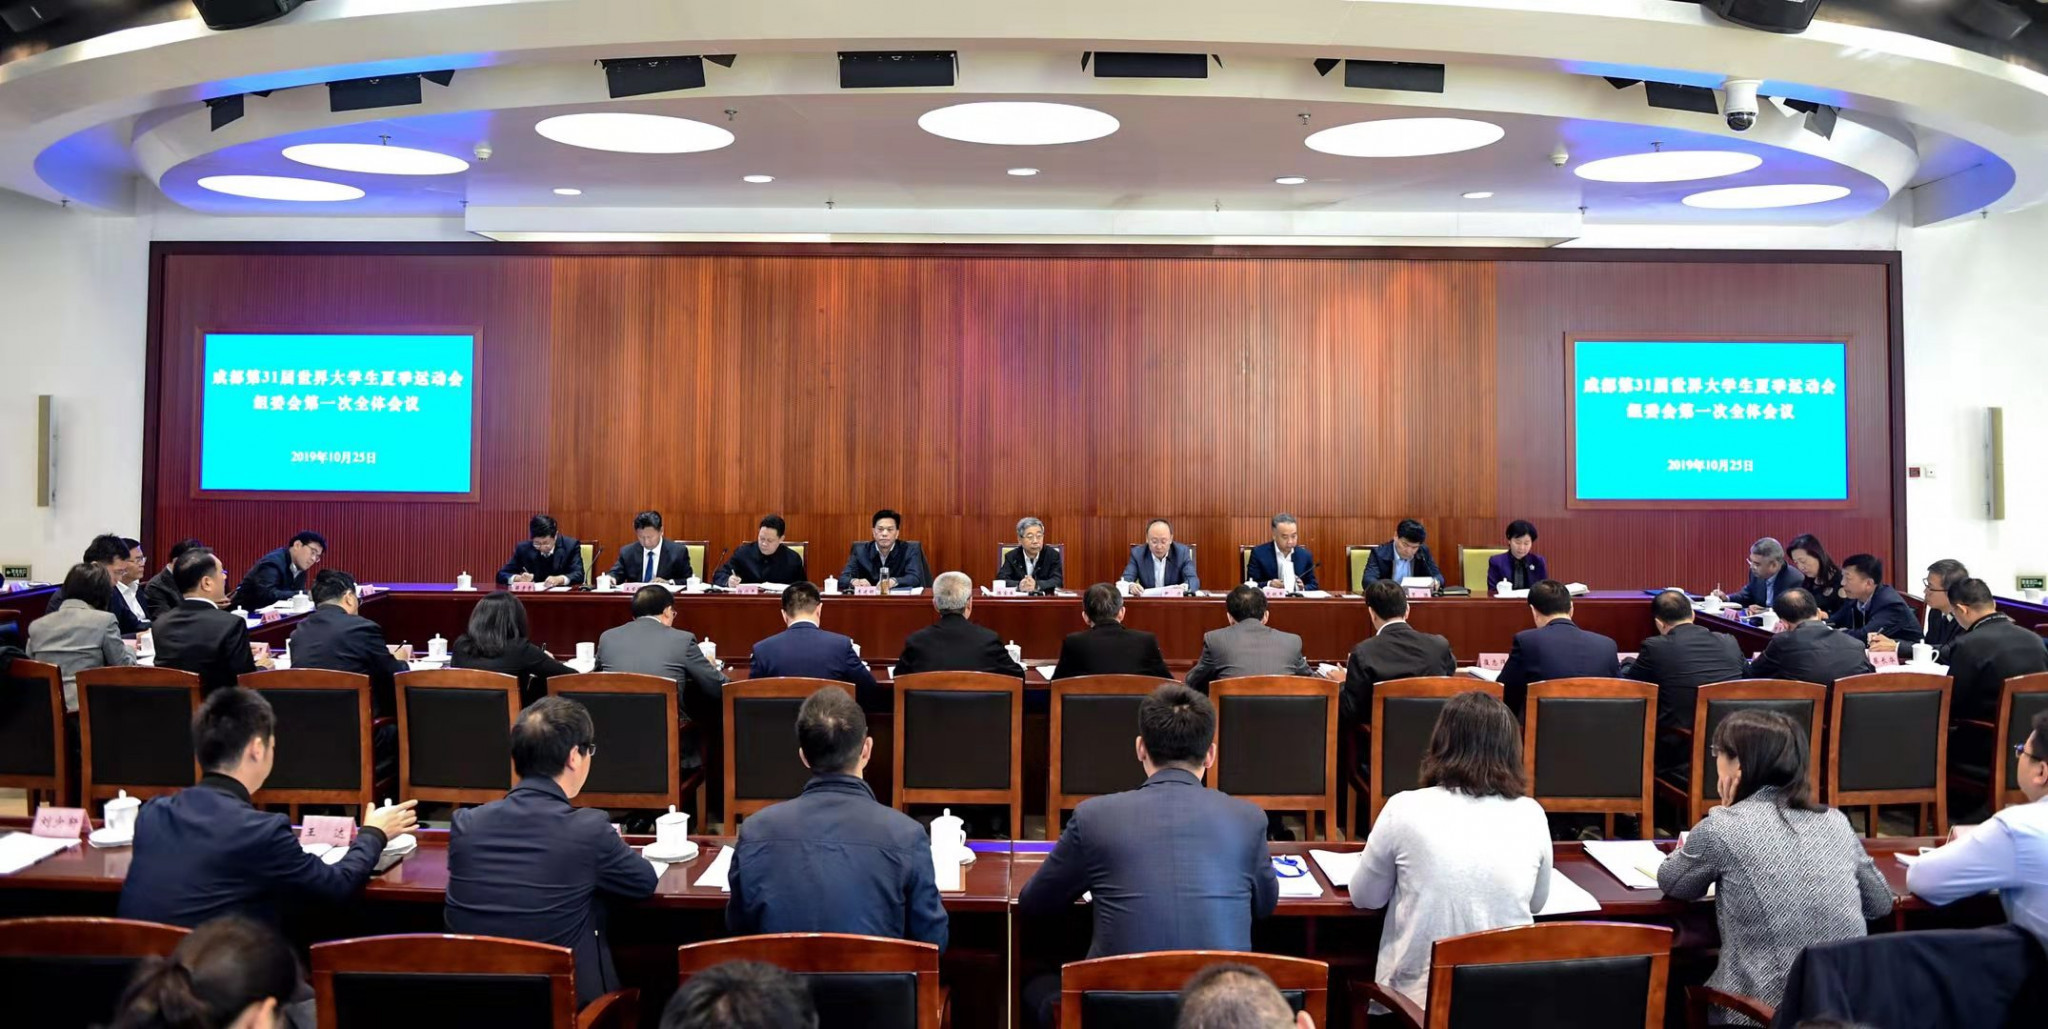 The Organising Committee of the 2021 Summer Universiade in Chinese city Chengdu has met for the first time ©FISU